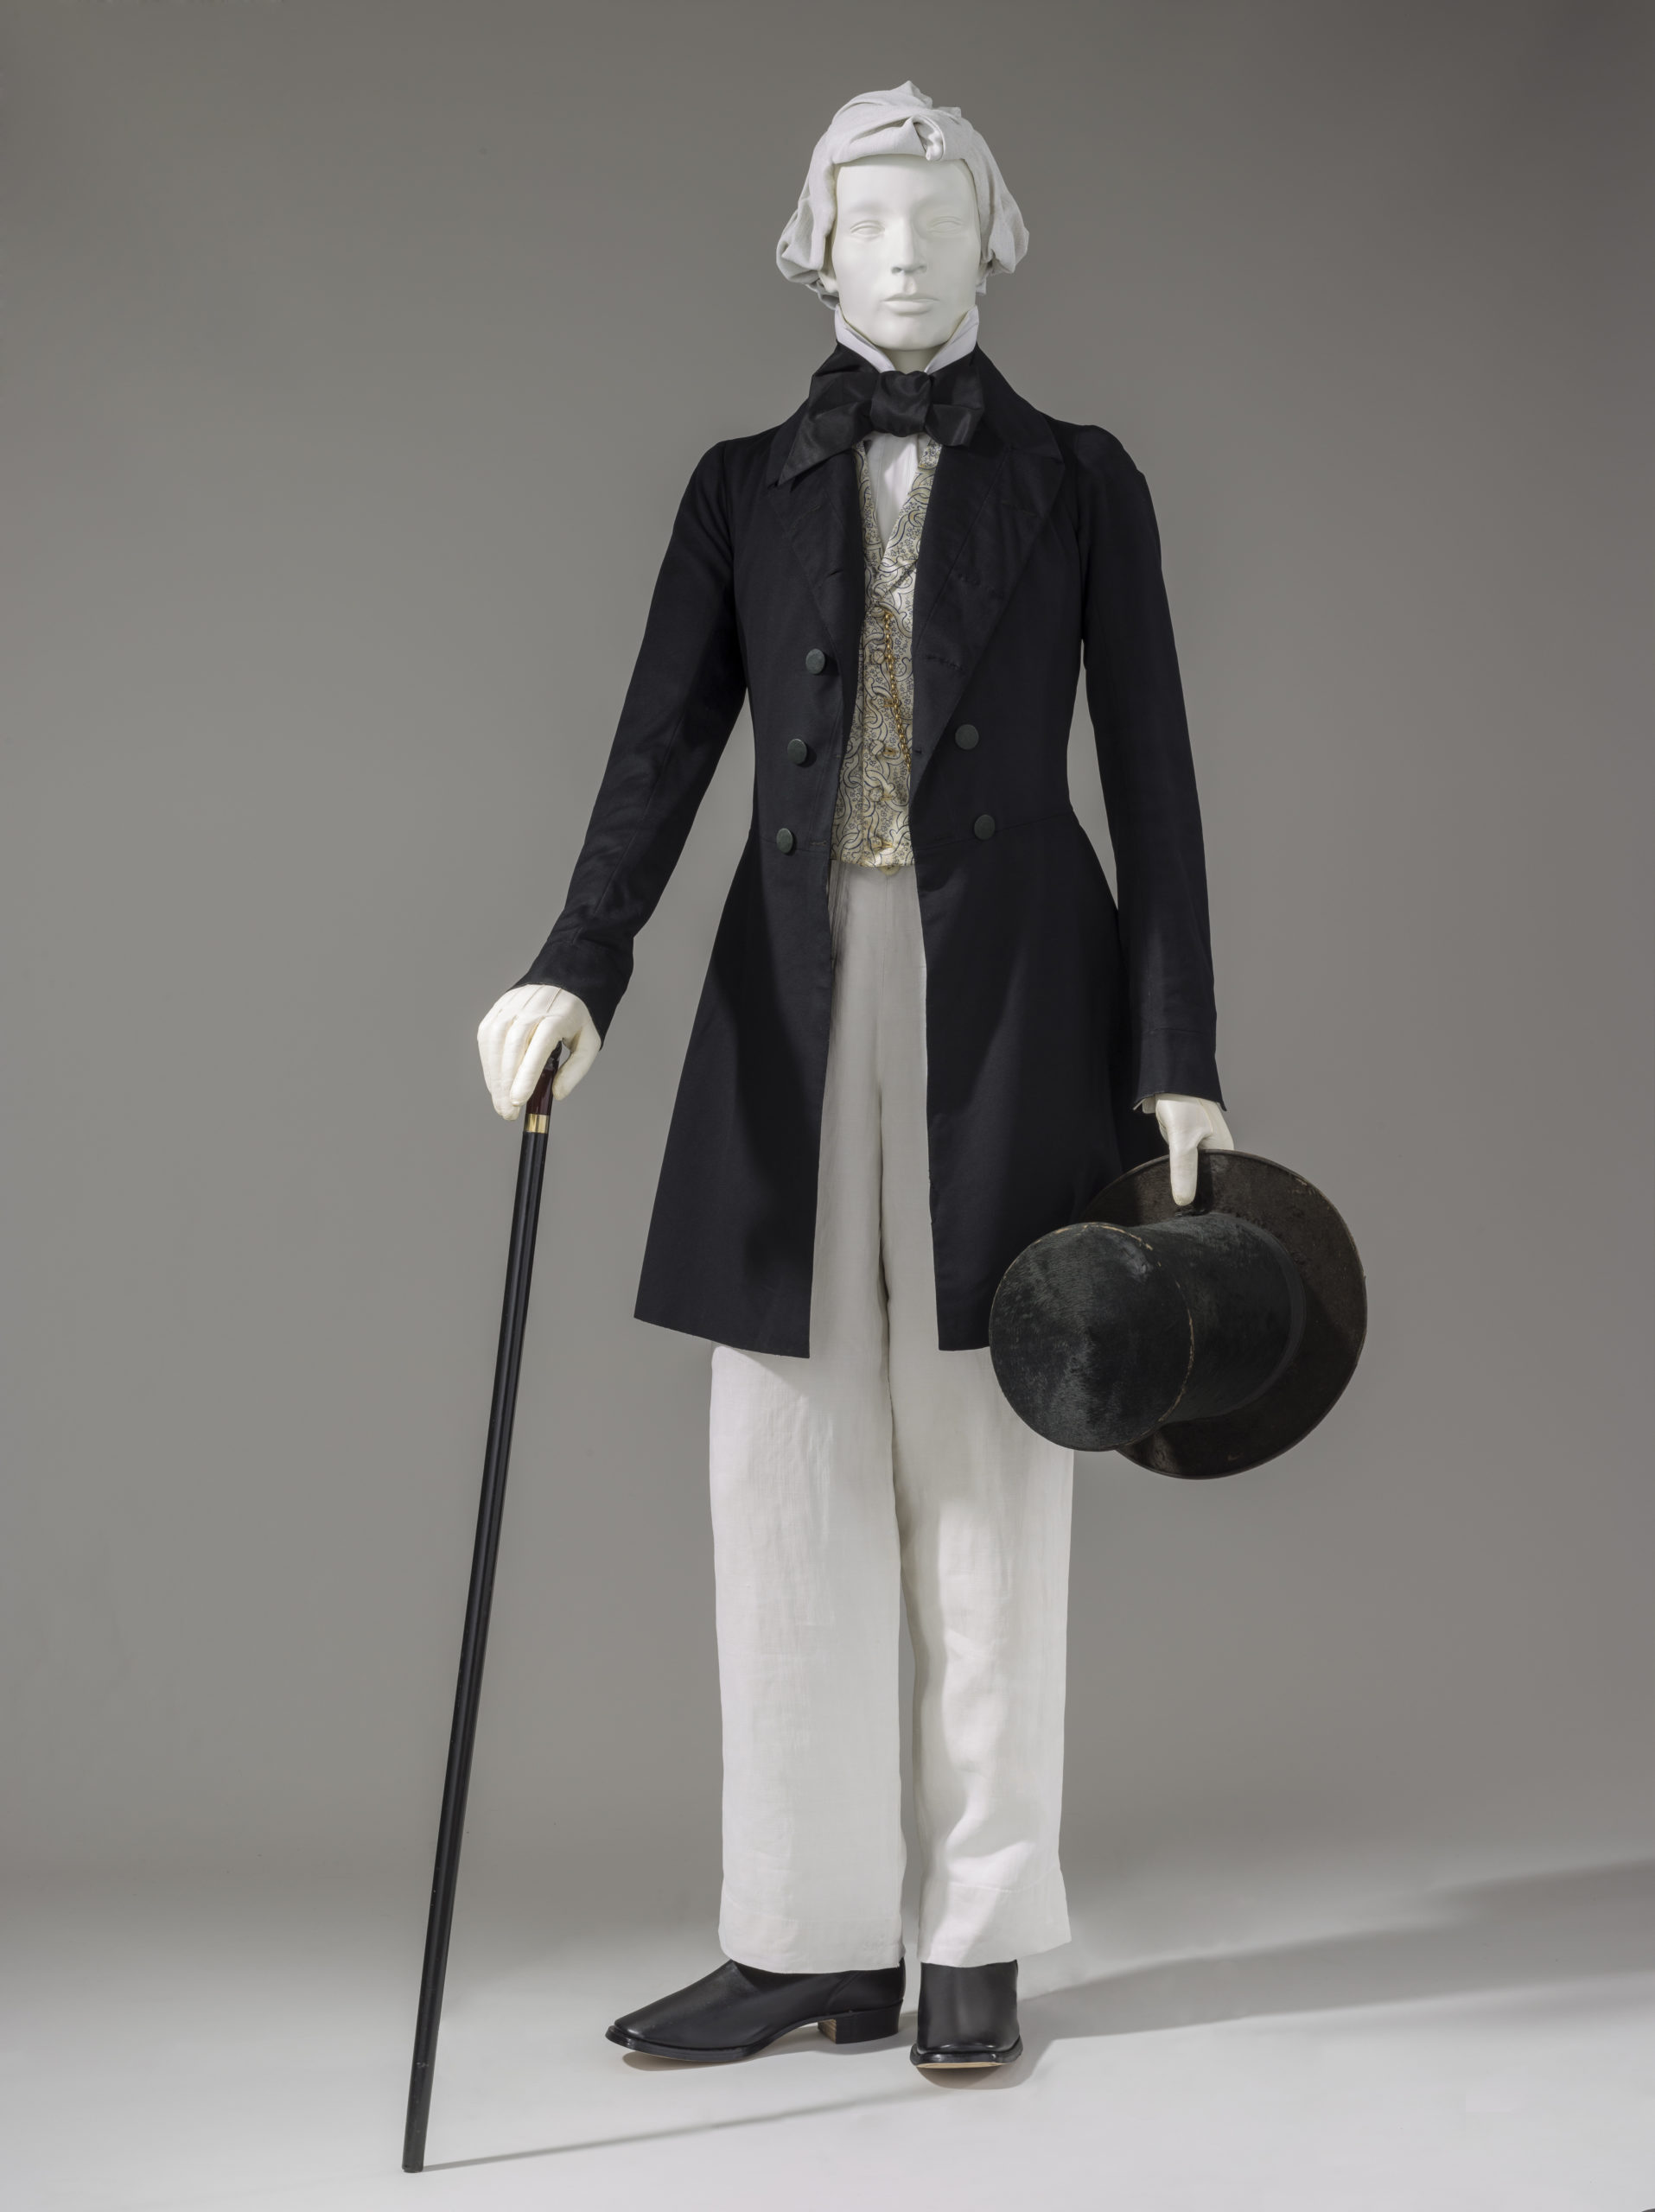 Man’s Frock Coat and Trousers, circa 1852 (Los Angeles County Museum of Art)